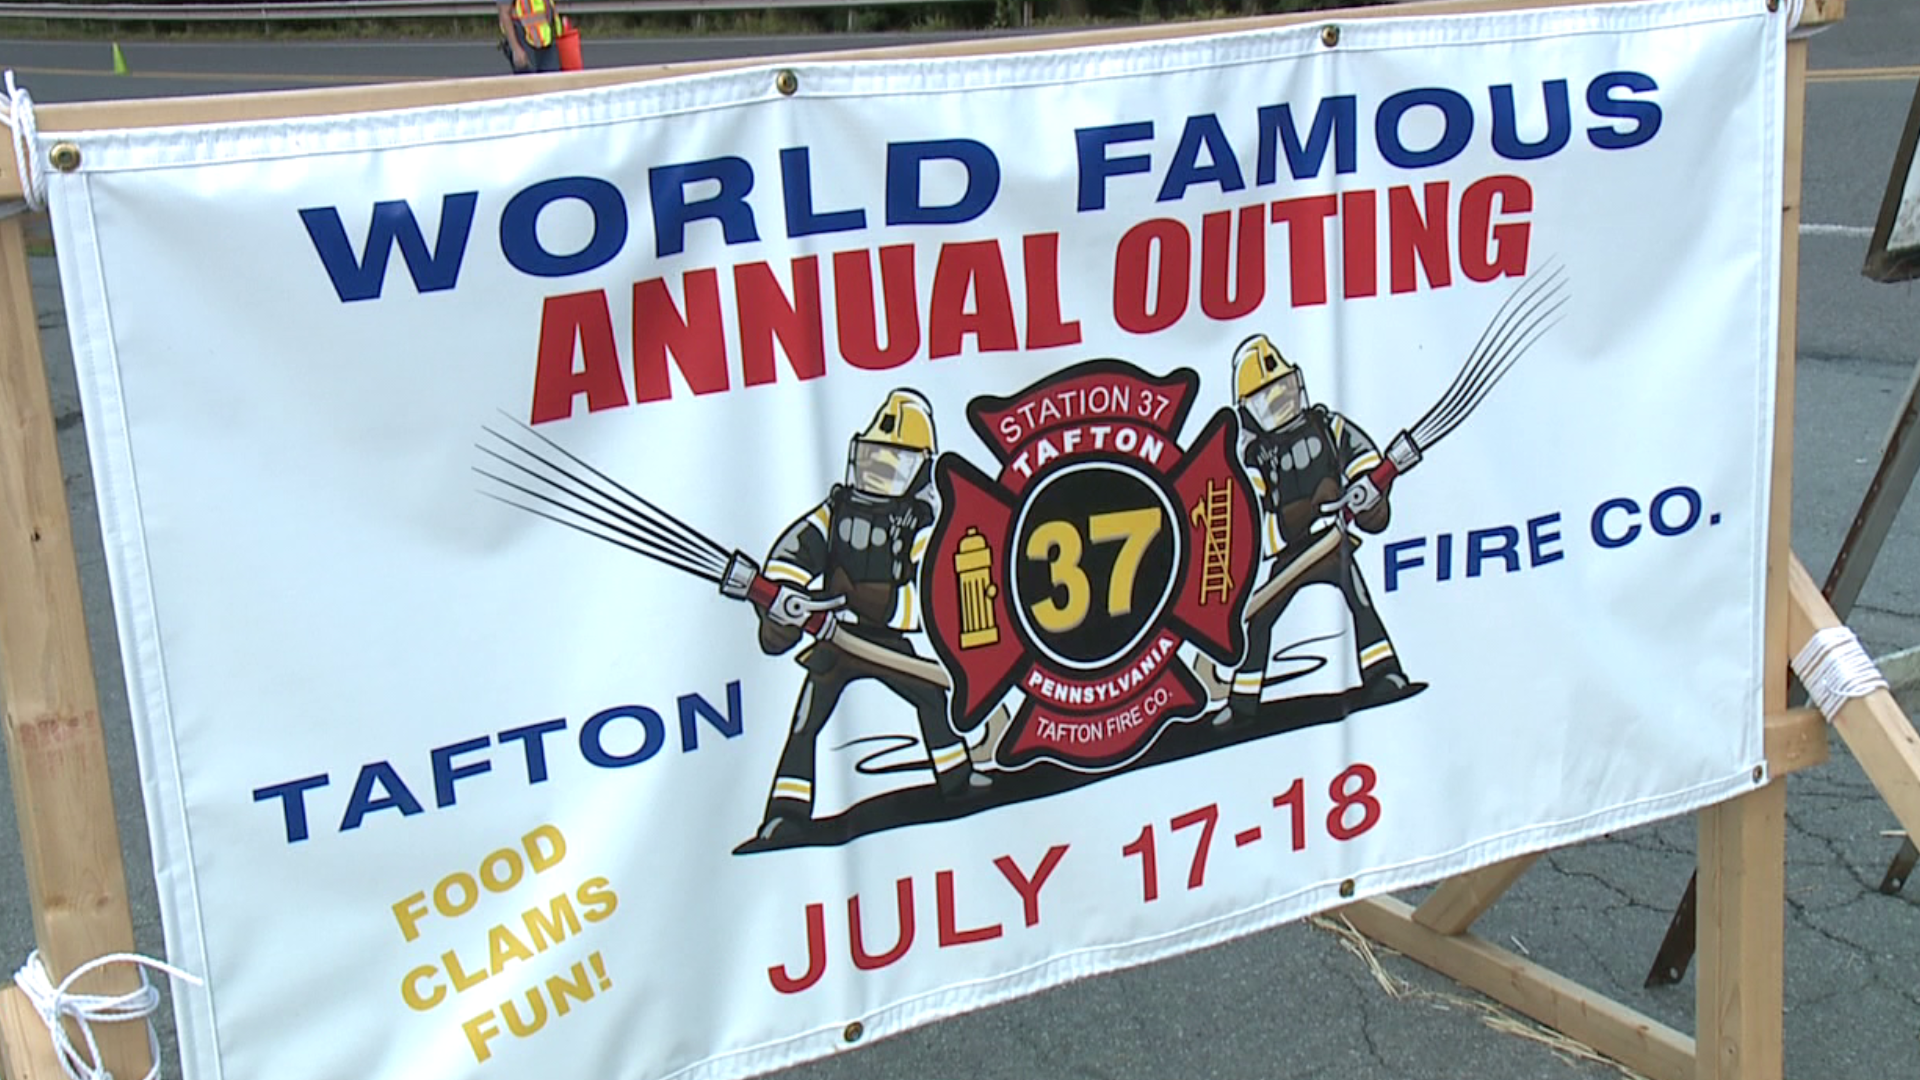 The annual "World Famous Outing" event in Tafton is underway.